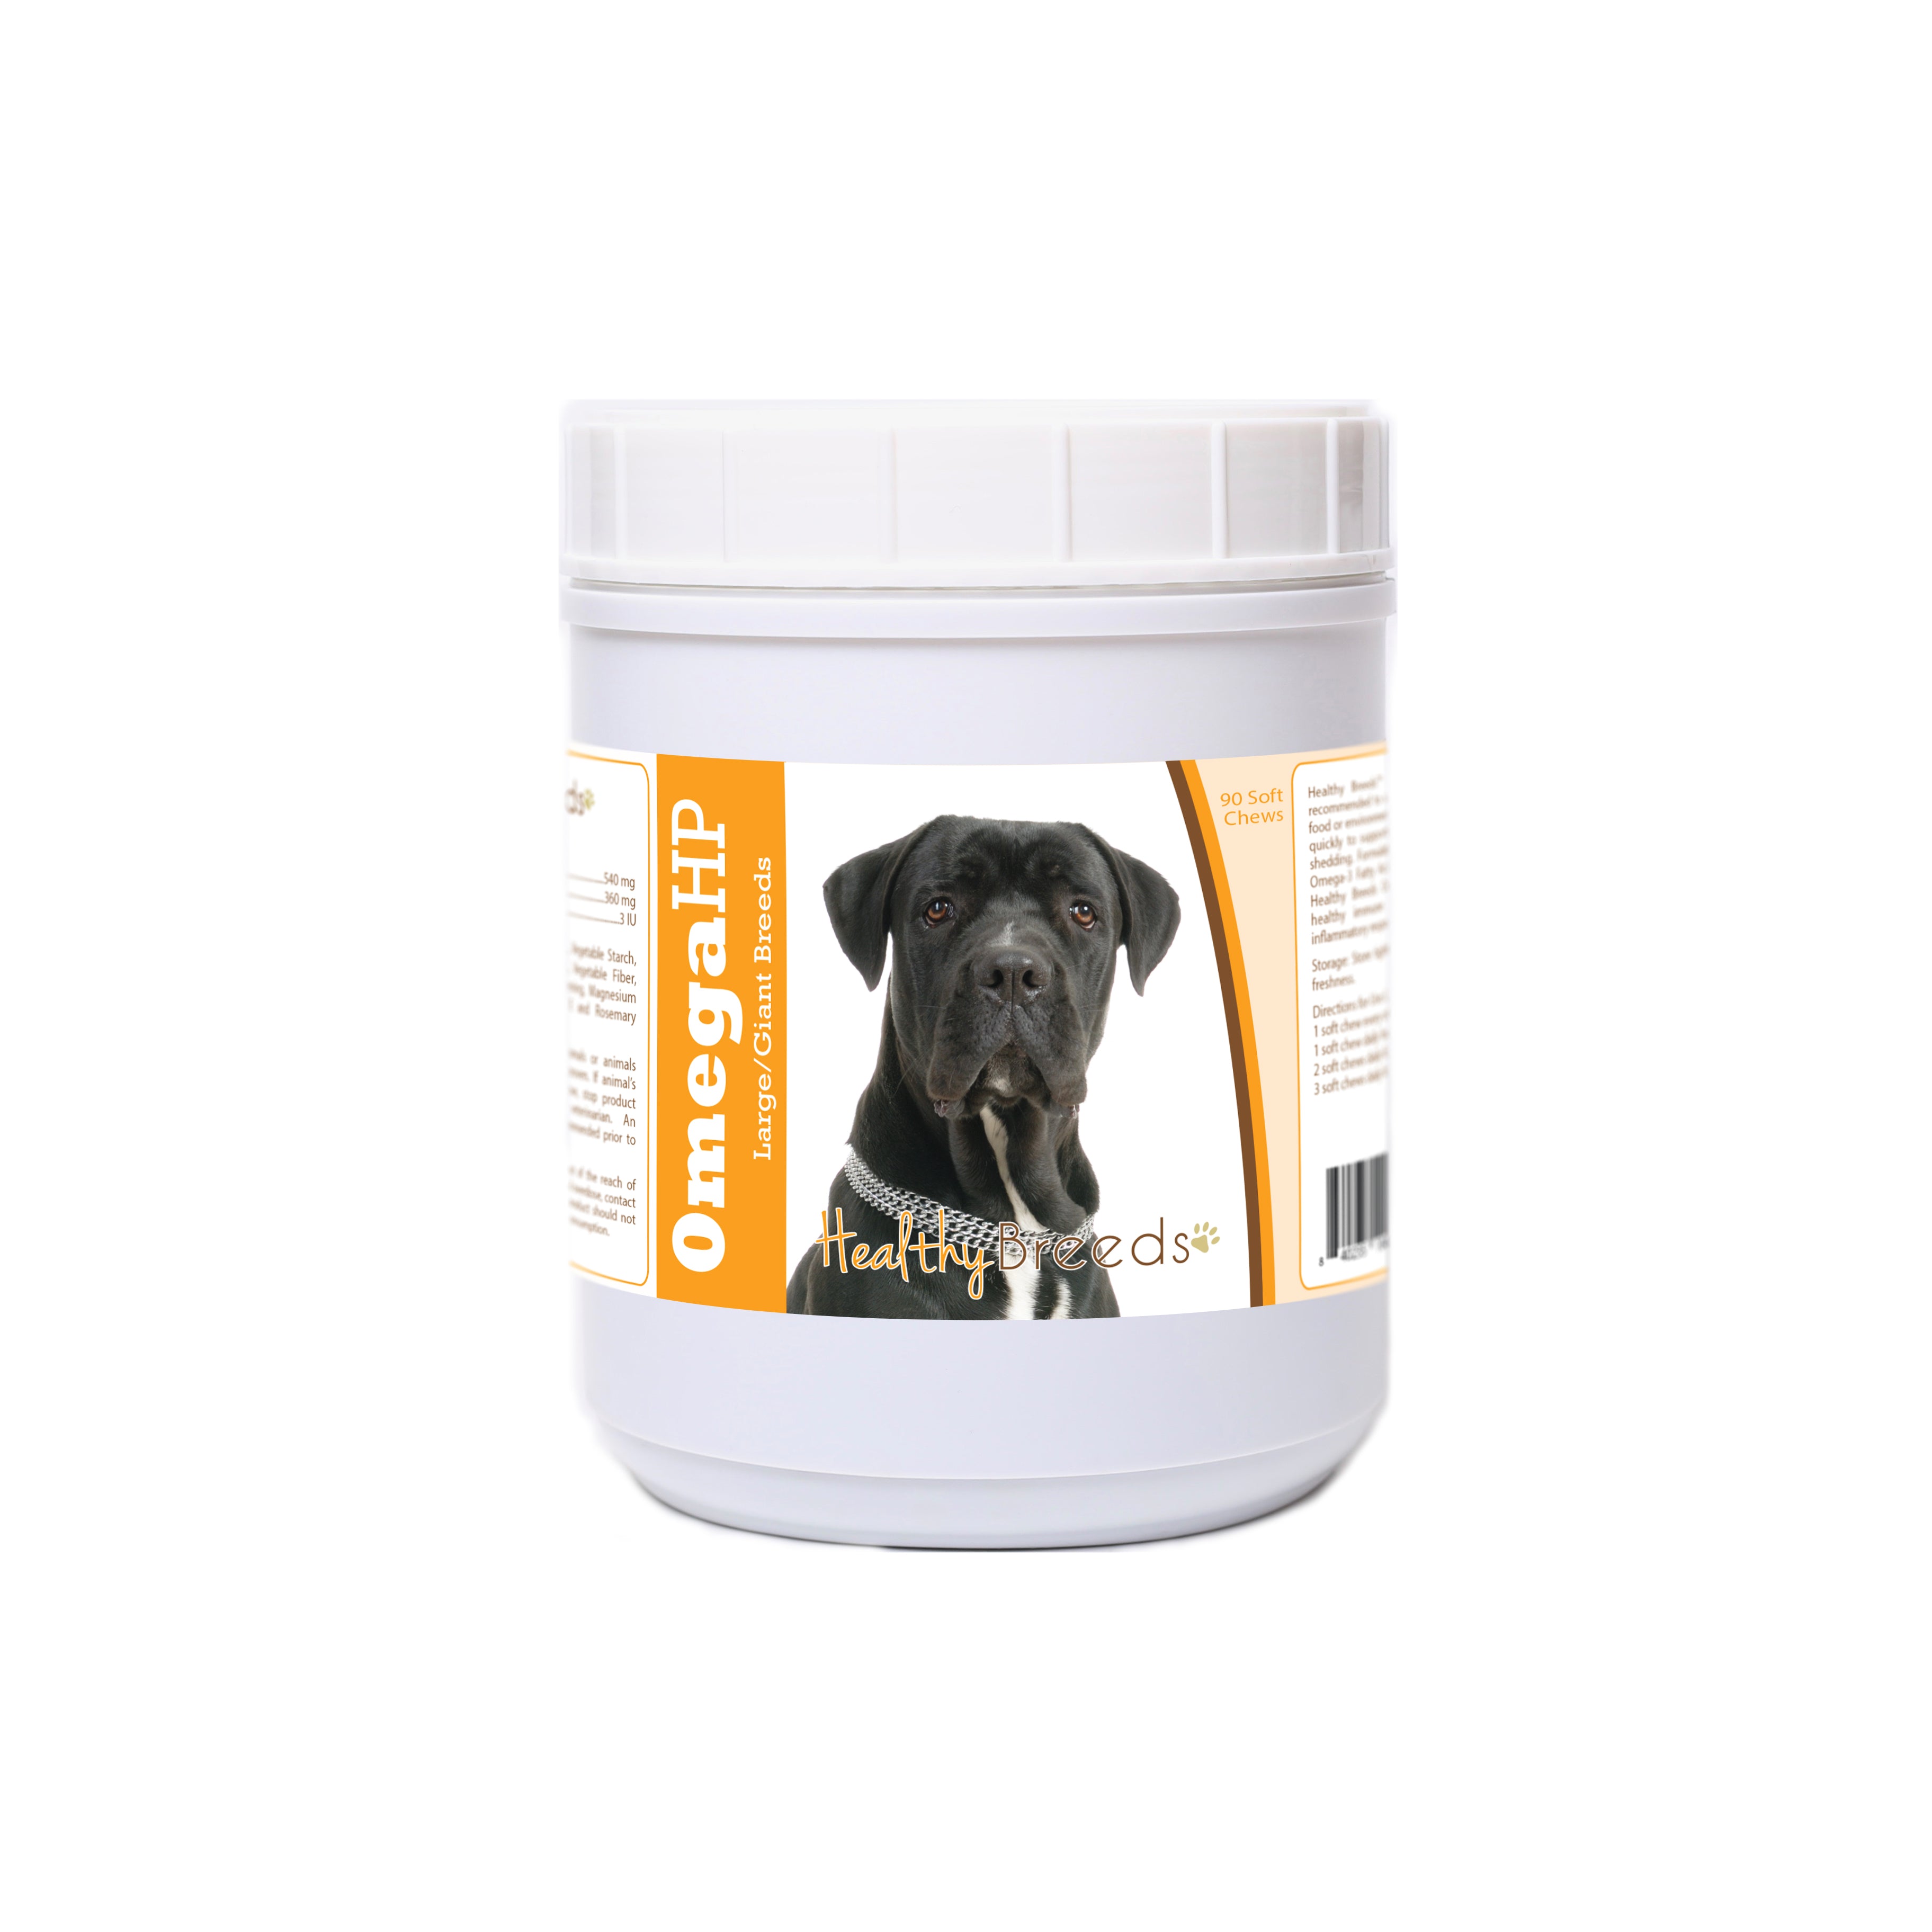 Cane Corso Omega HP Fatty Acid Skin and Coat Support Soft Chews 90 Count